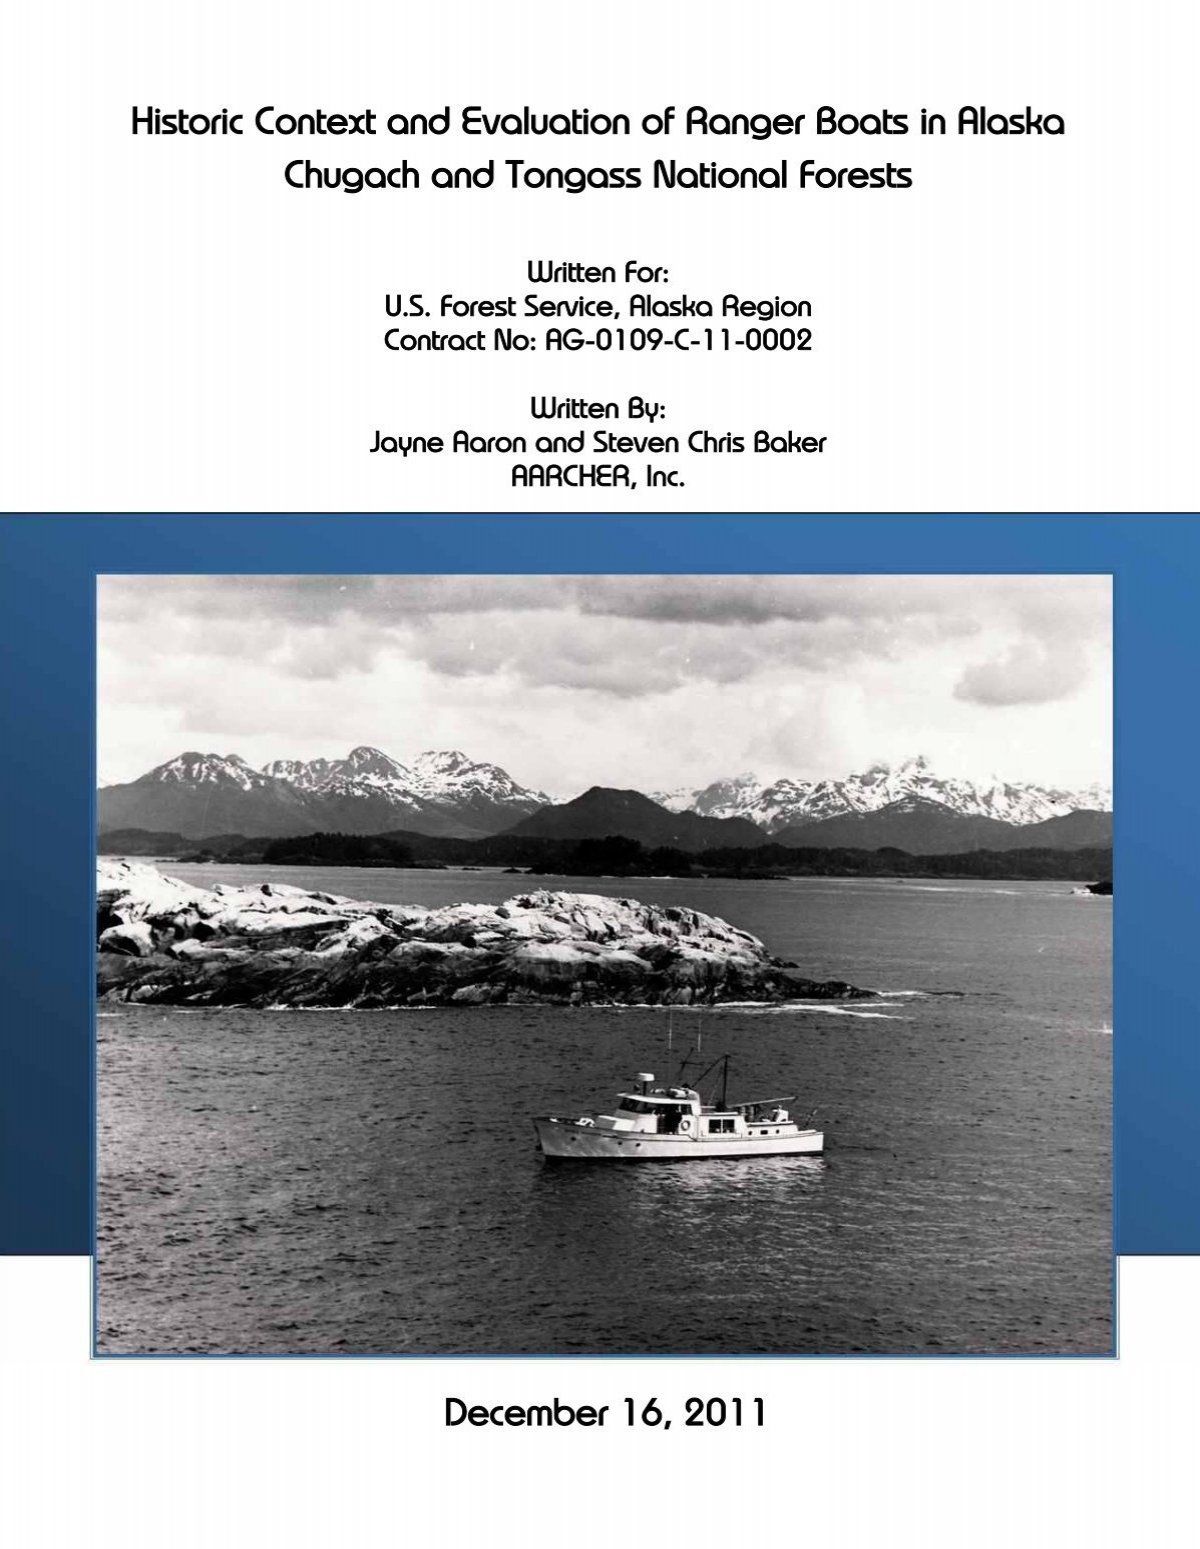 Historic Context and Evaluation of Ranger Boats in Alaska - City and